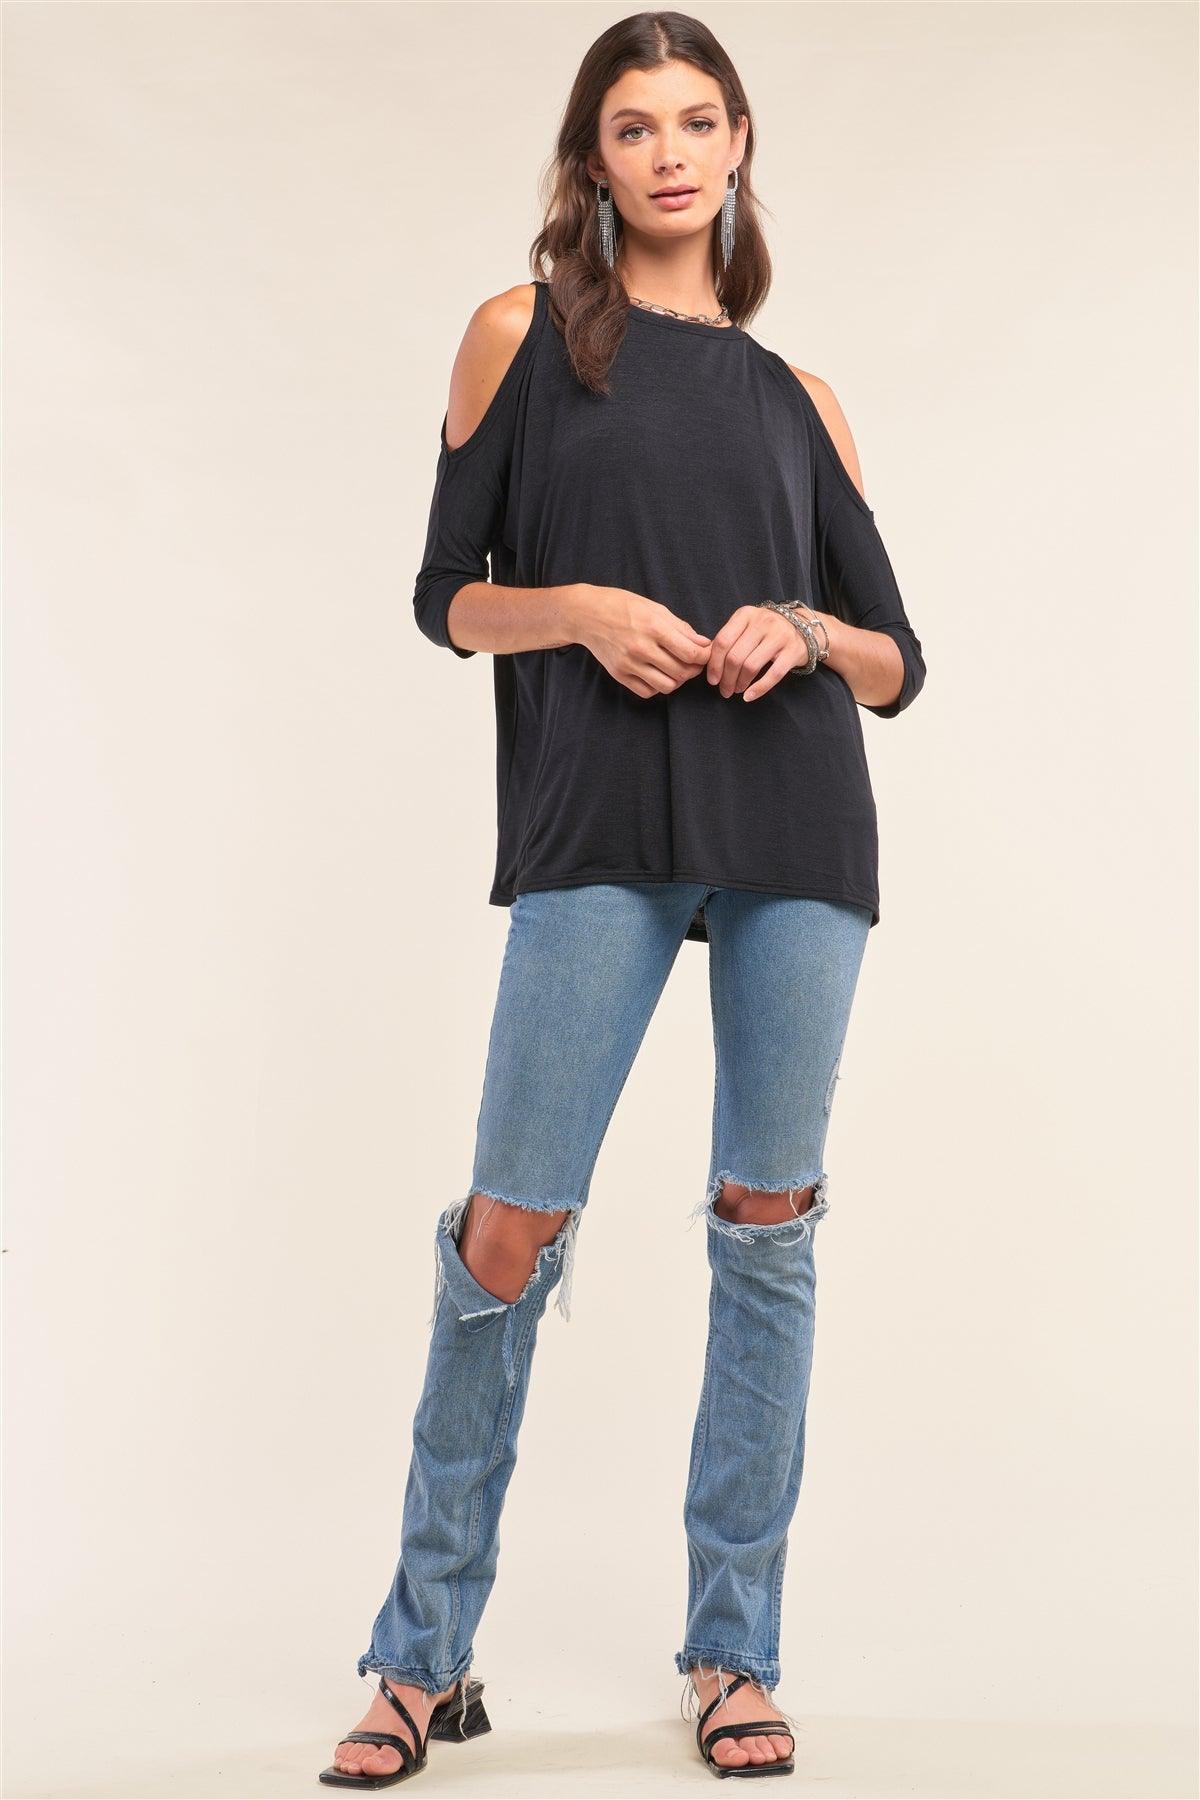 Black Relaxed Fit Crew Neck Midi Sleeve Cut-Out Shoulder Detail Yoga Top /2-1-2